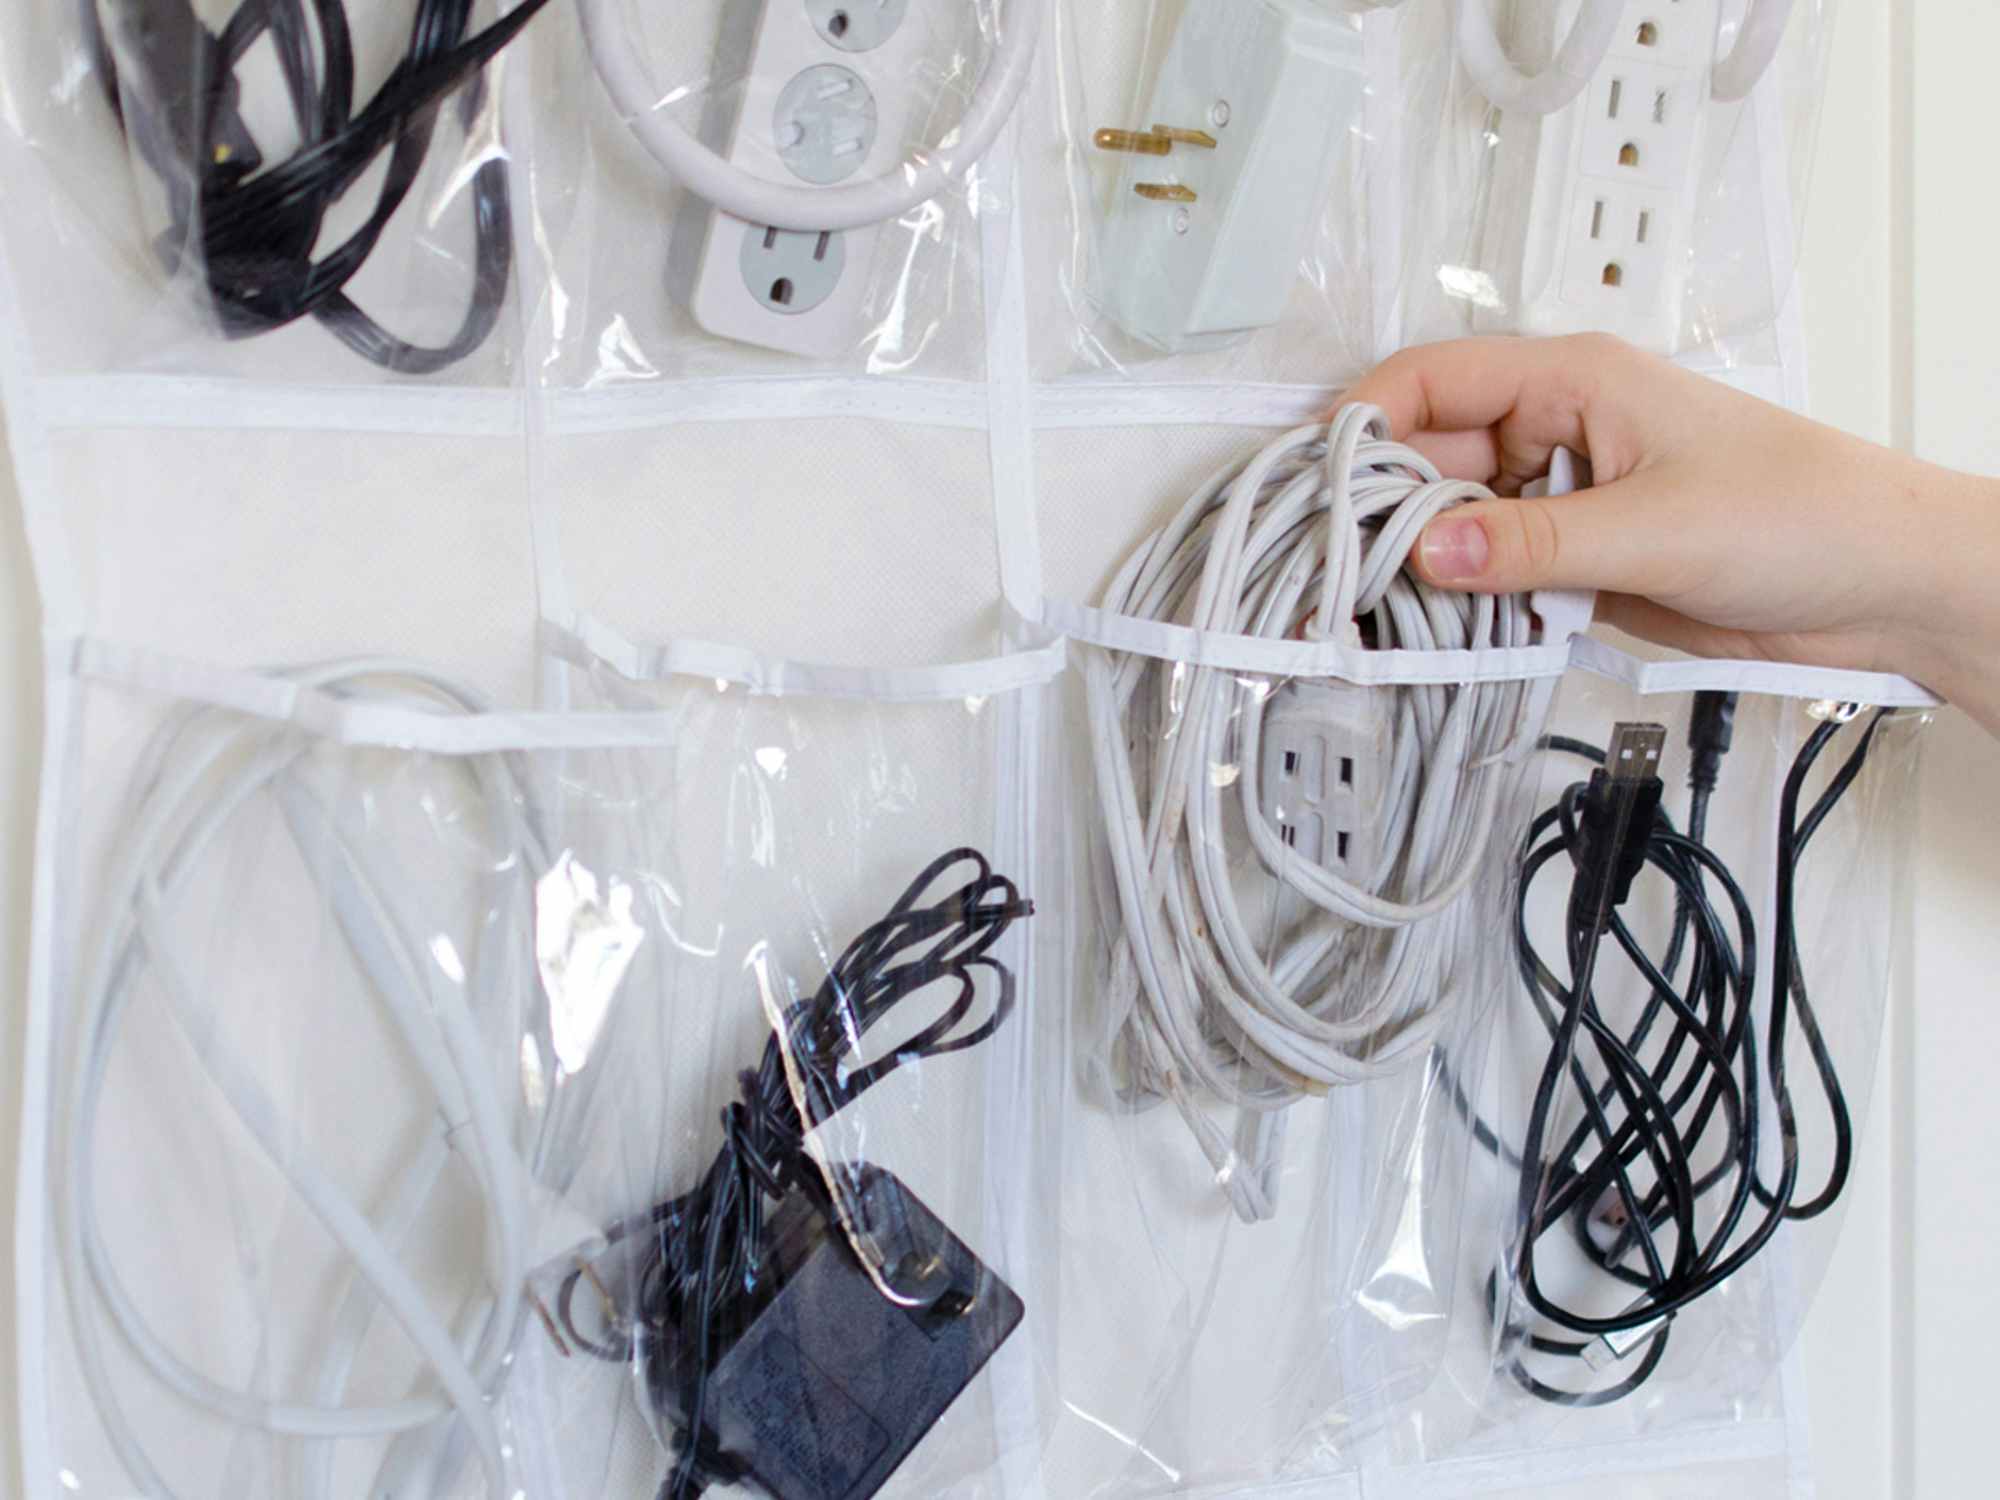 Someone putting an extension cord into a shoe organizer filled with other extension cords and power strips